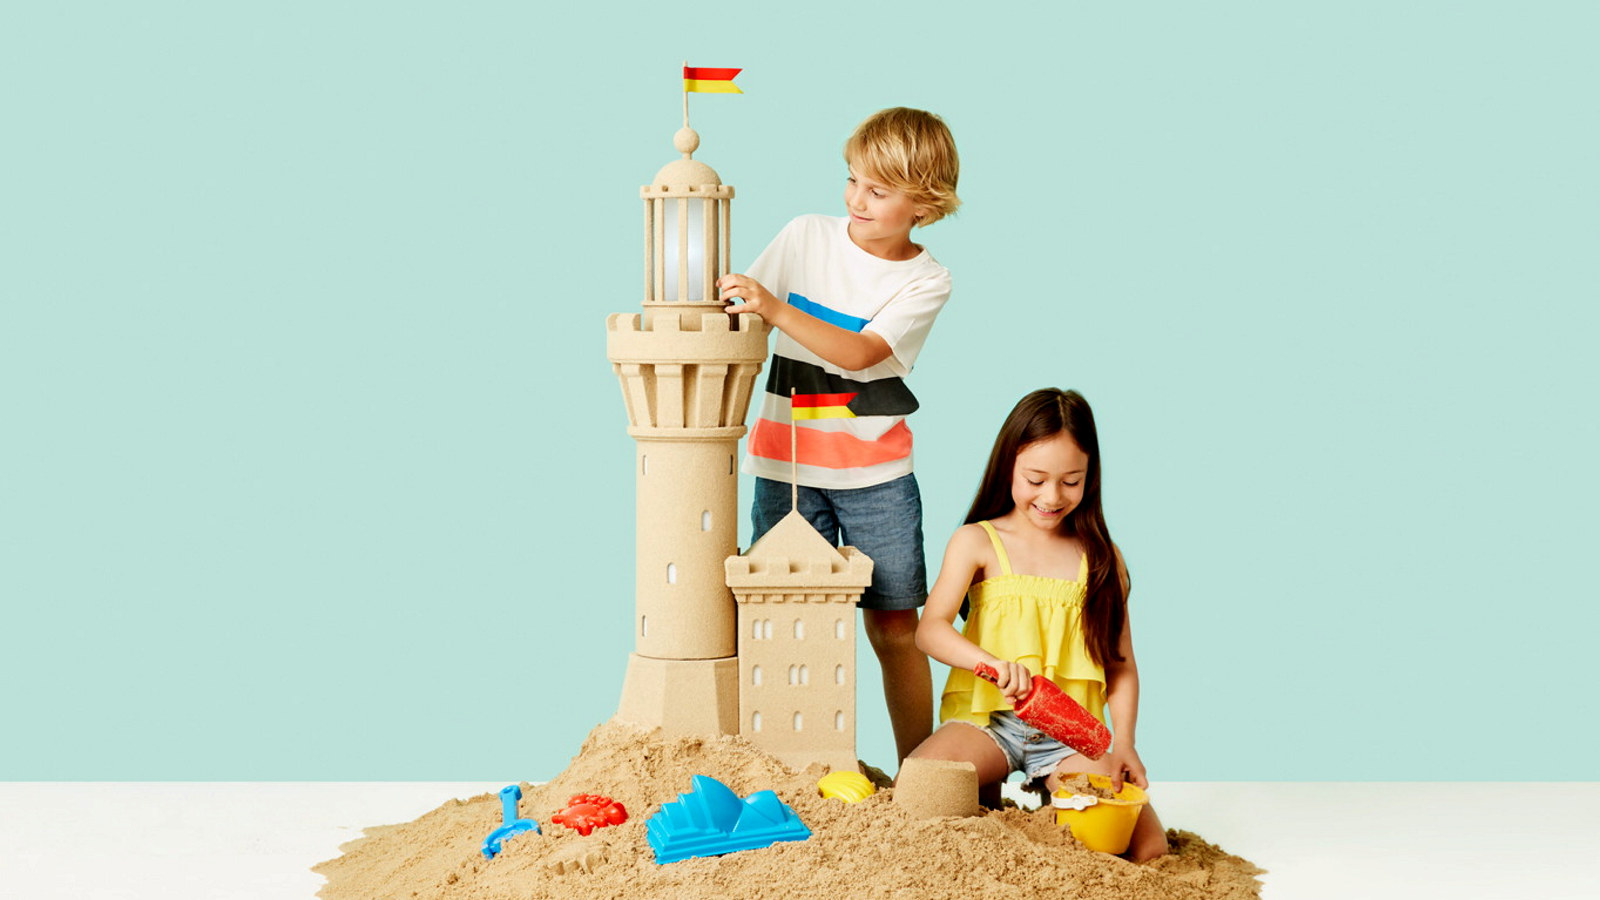 A young boy and girl play with a sand castle tower